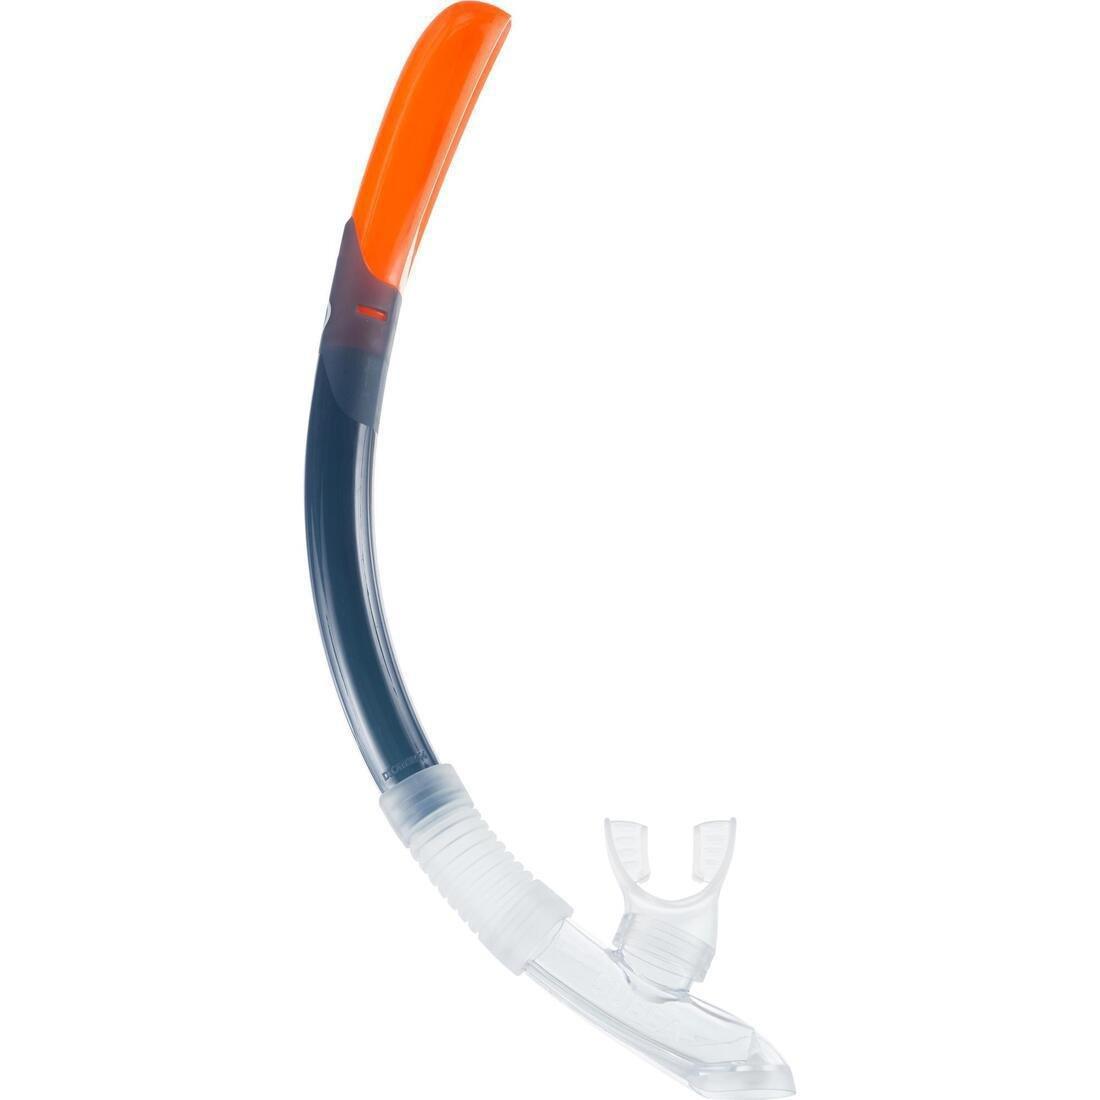 SUBEA - Diving Snorkel With Valve 100, Grey